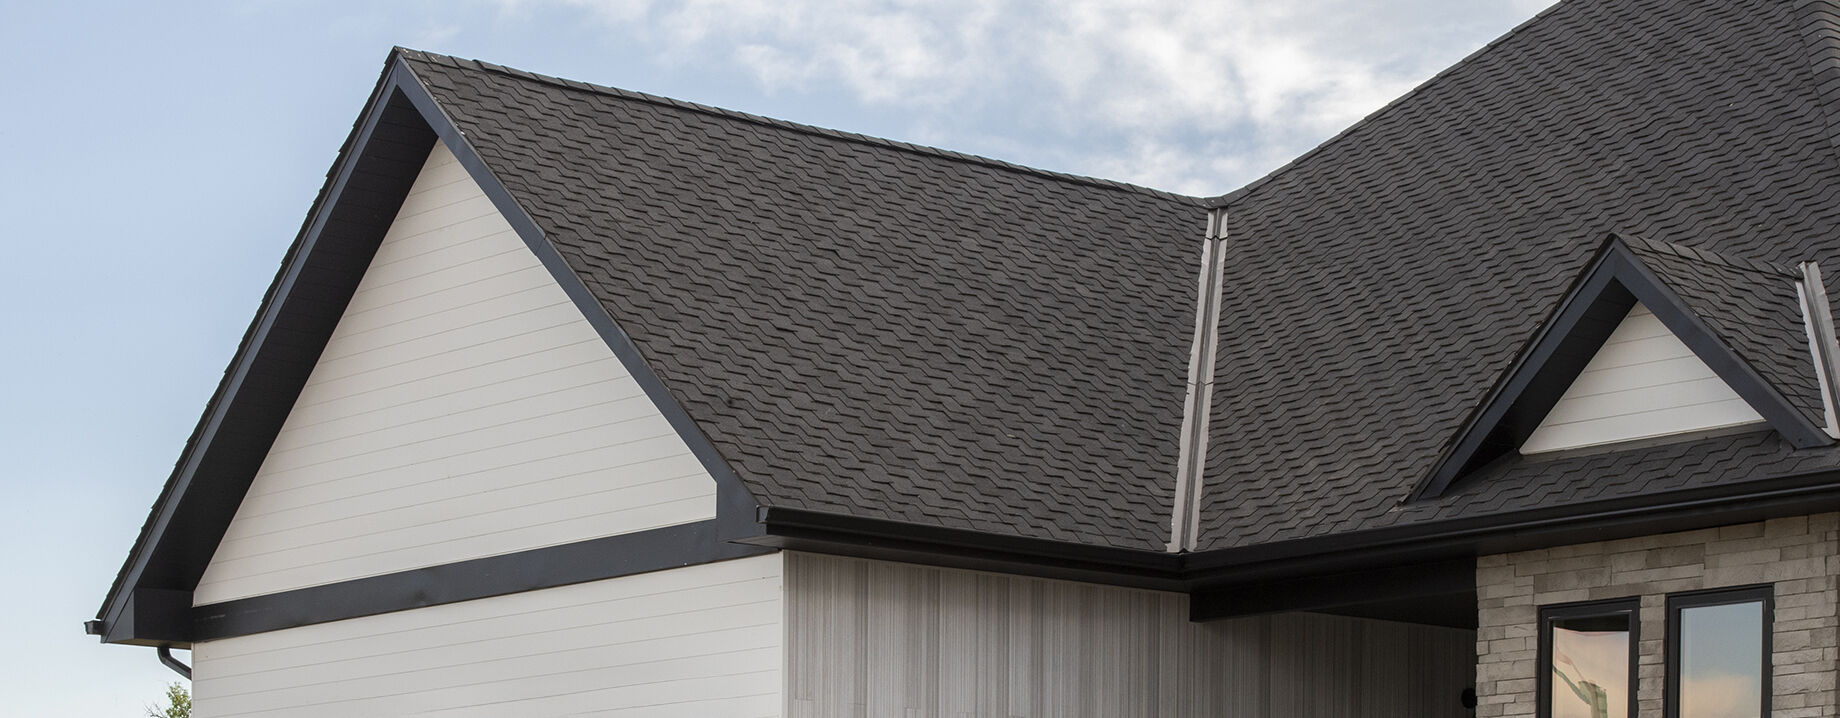 W-Valley: Combining Functionality and Aesthetic Appeal in Roofing Installations